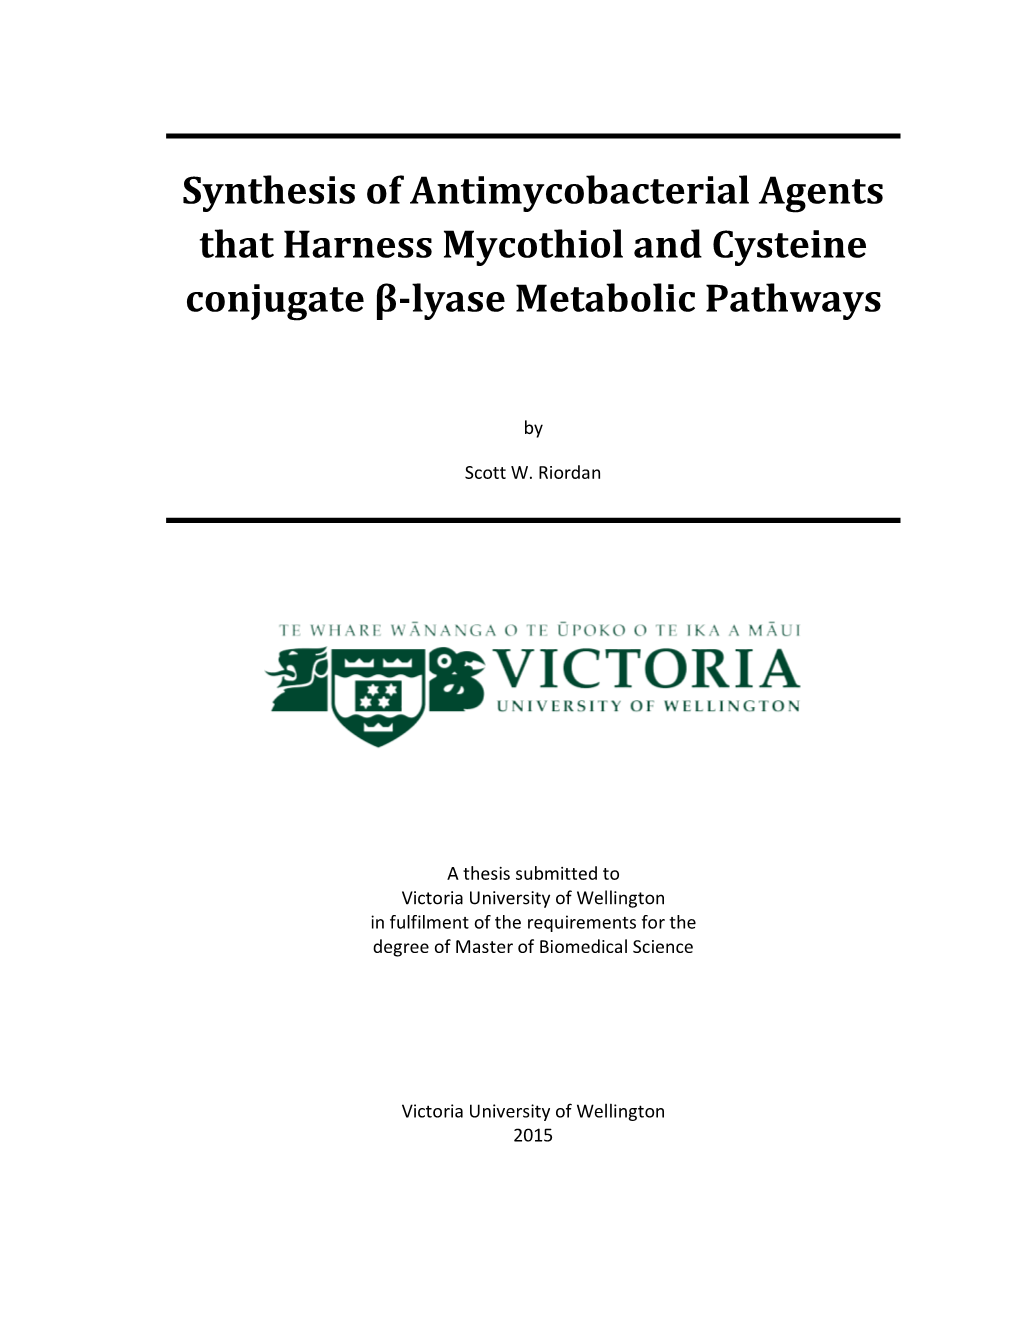 Synthesis of Antimycobacterial Agents That Harness Mycothiol and Cysteine Conjugate Β-Lyase Metabolic Pathways